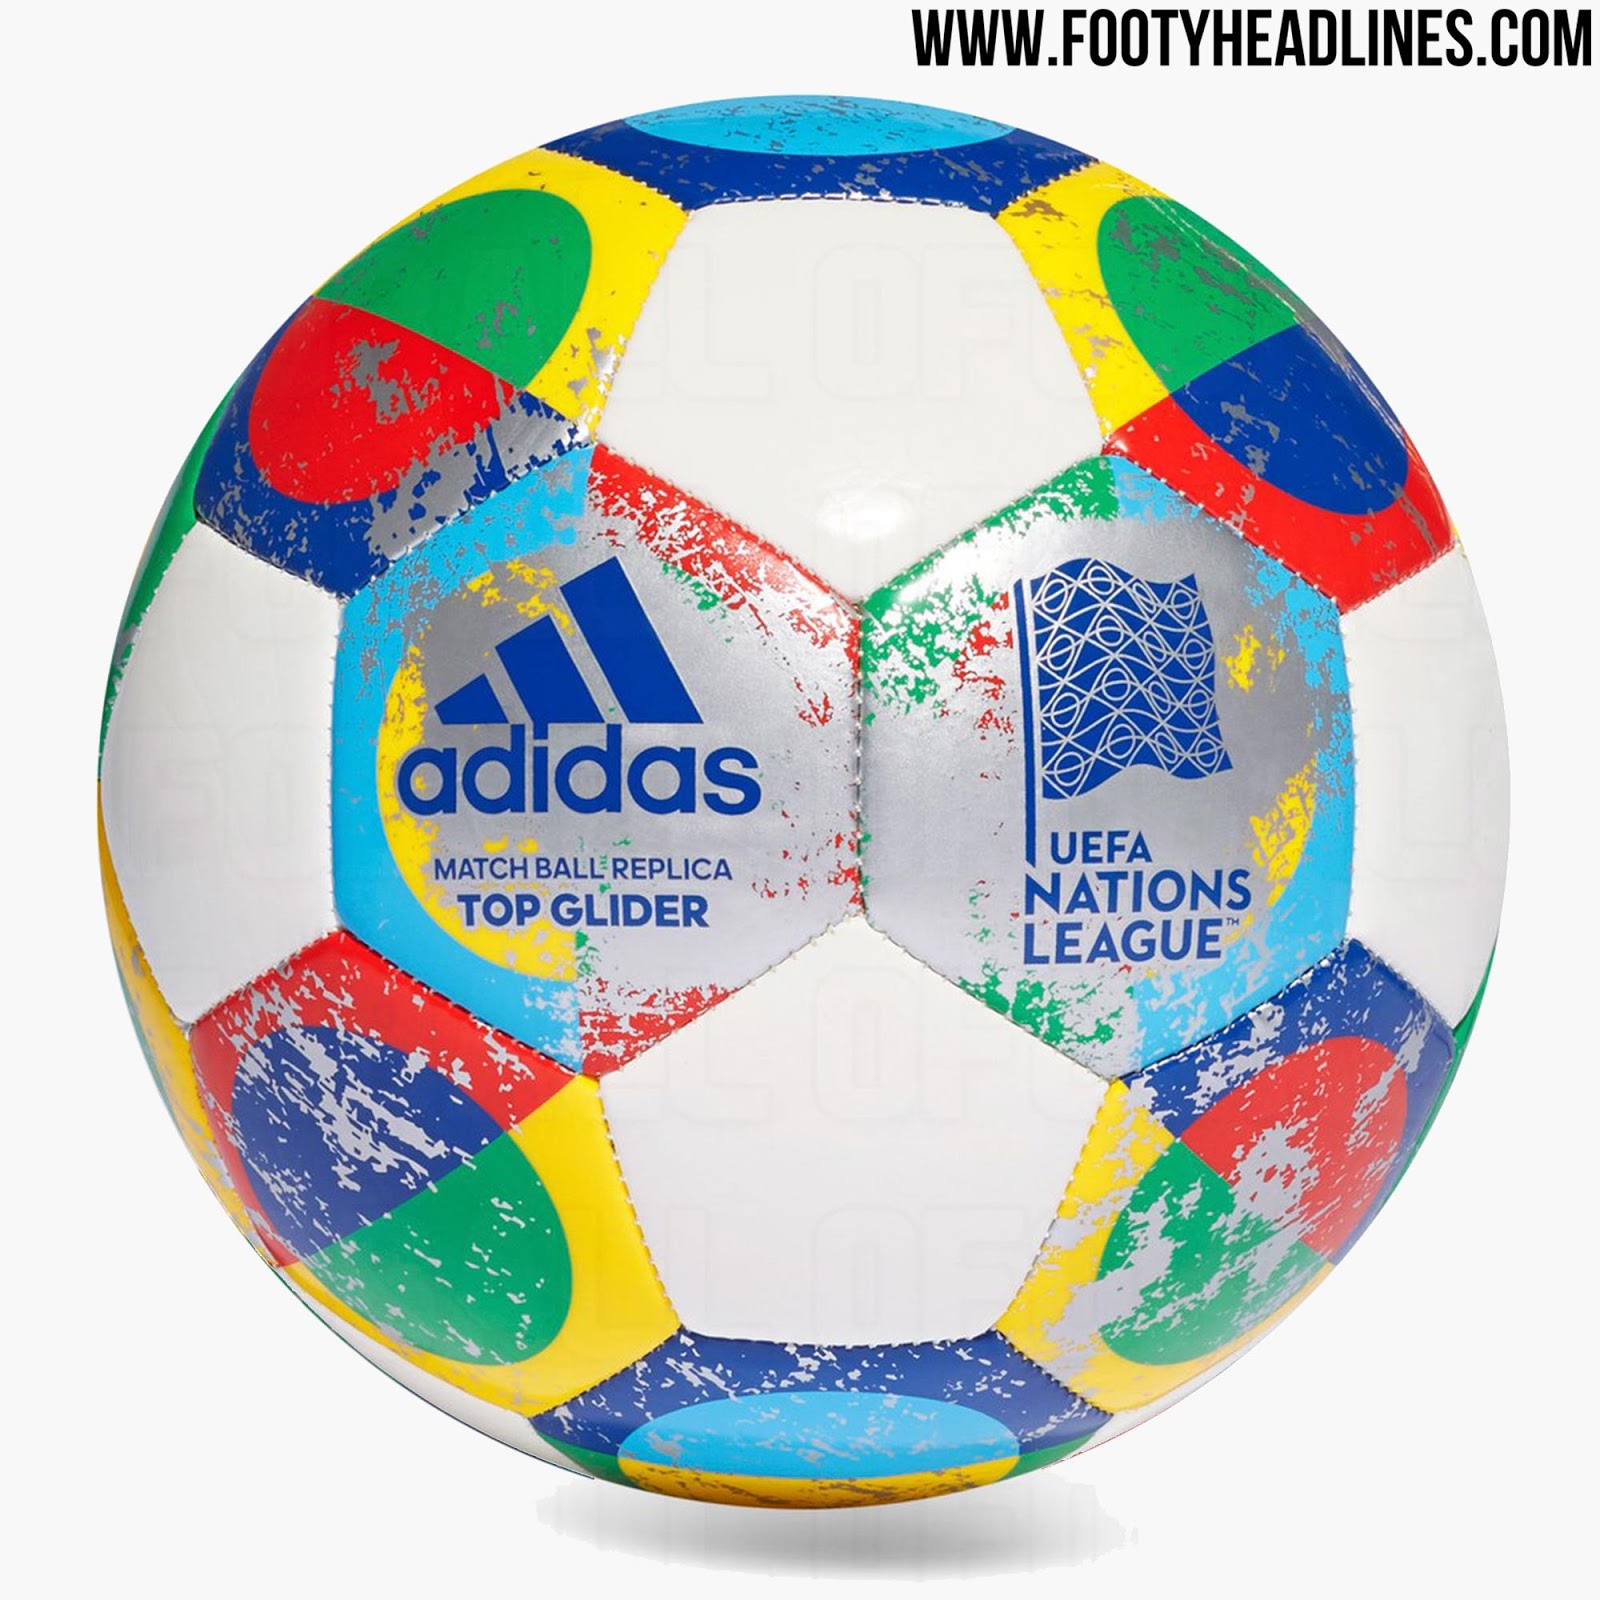 Adidas UEFA Nations League Replica Ball Looks Extremely Cheap - Footy